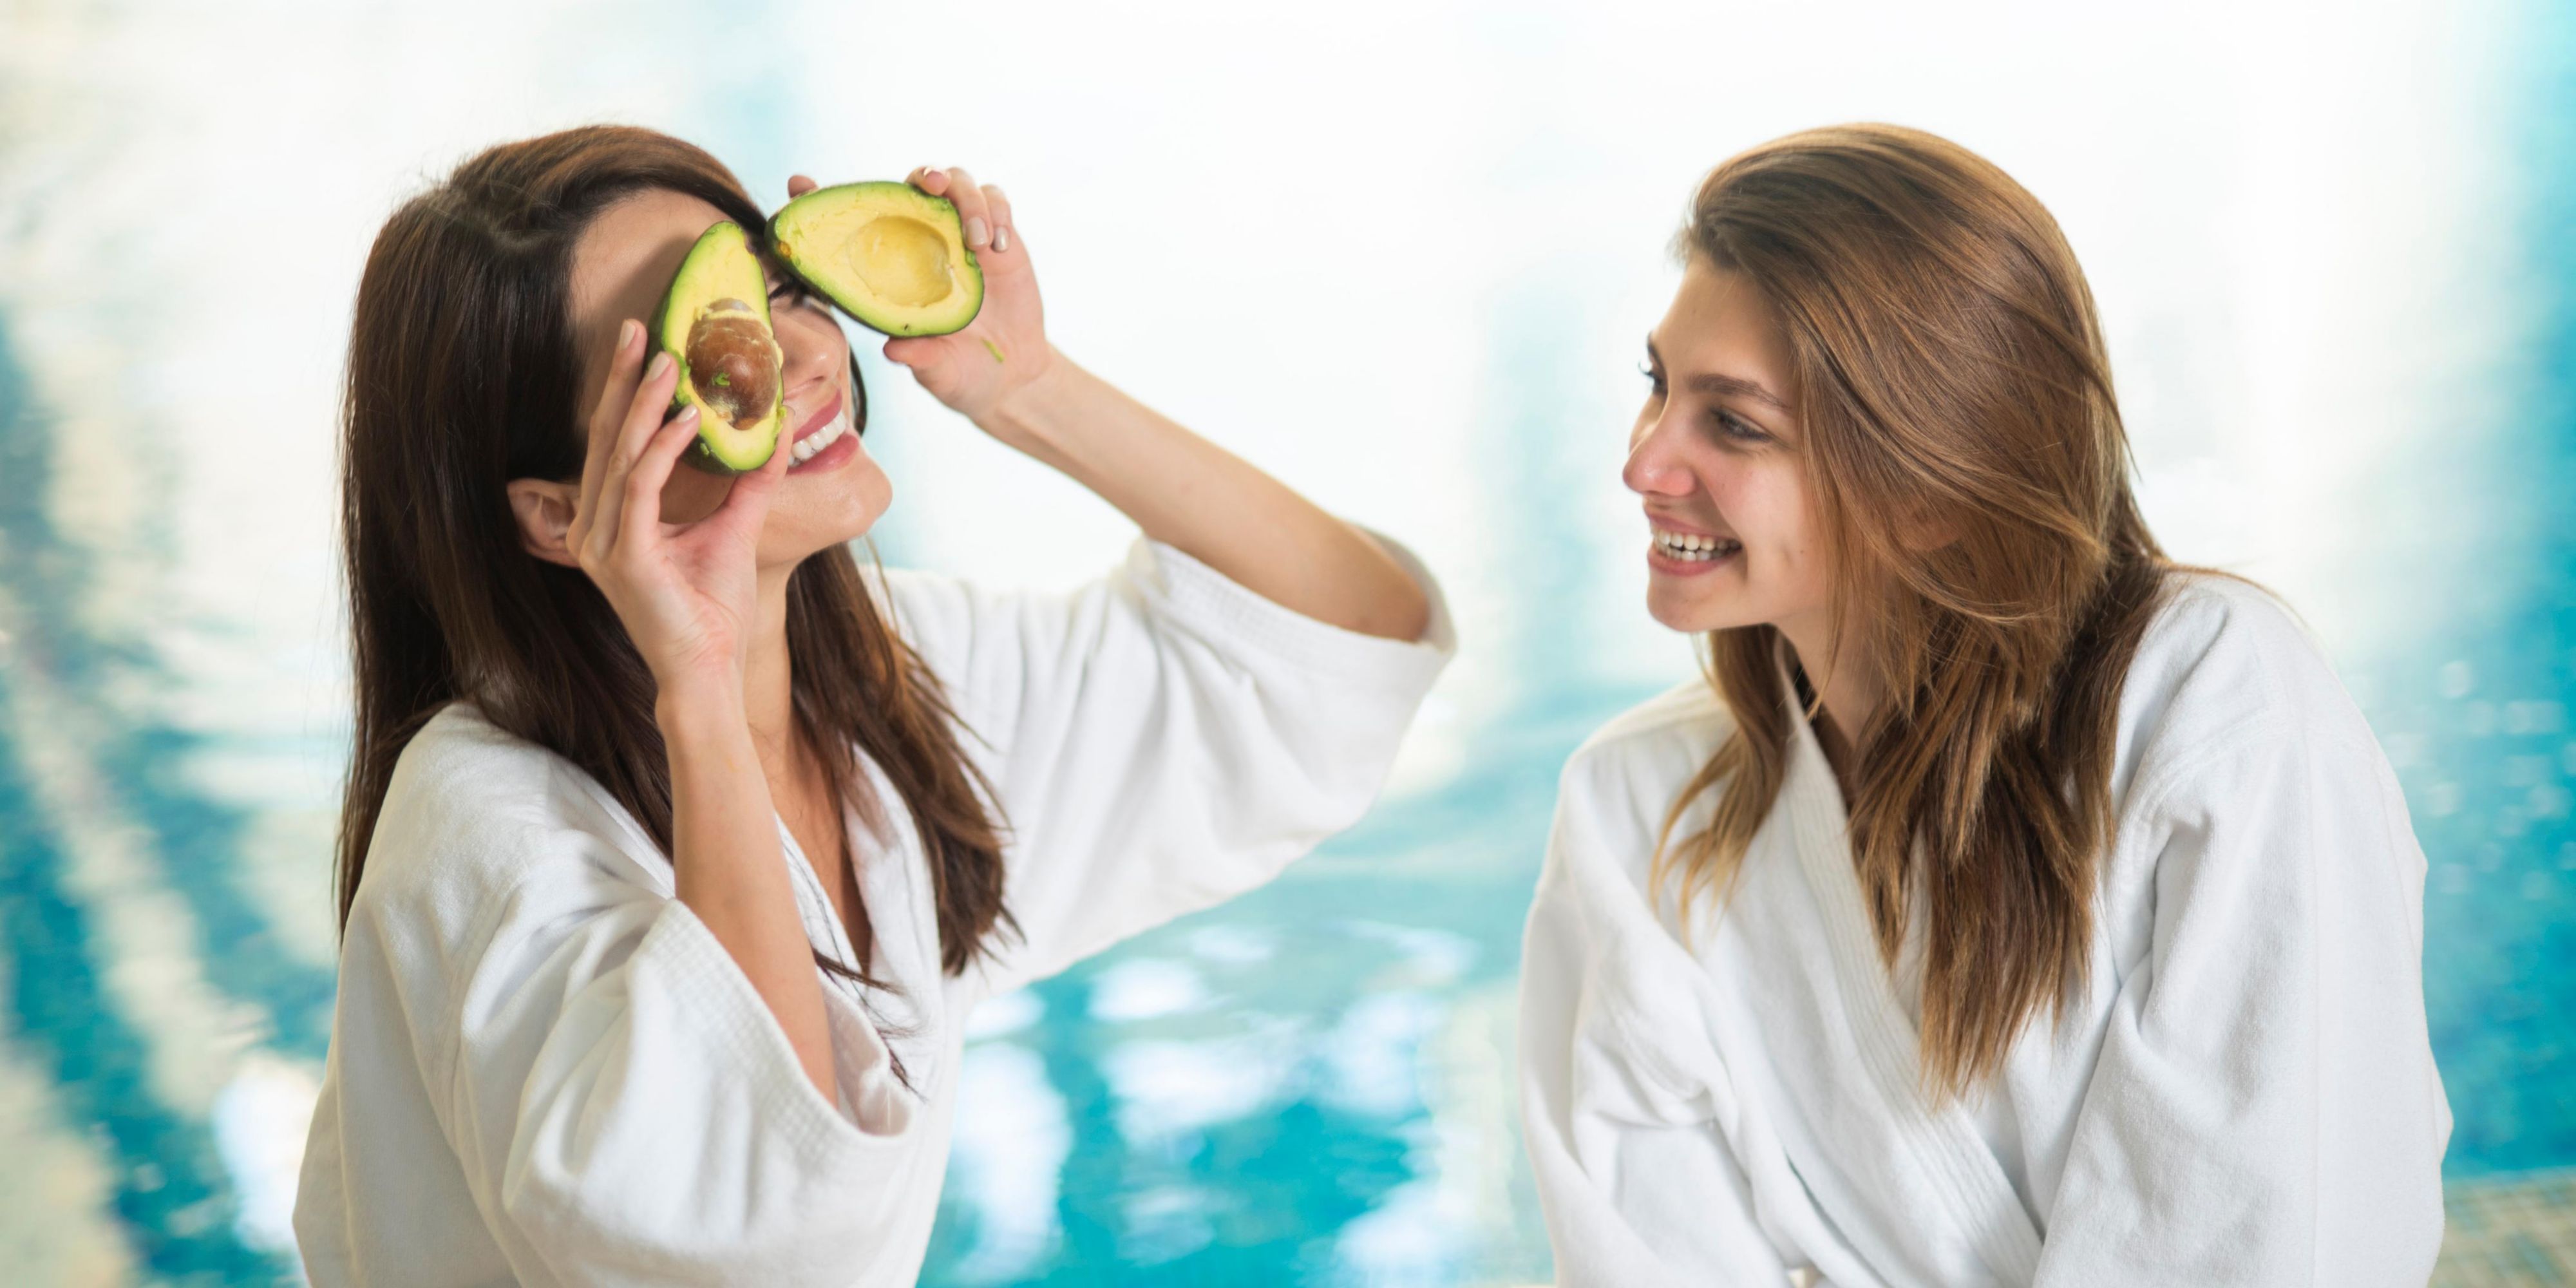 Step into a world of wellness in our 3,000 square metres of spa facilities, where you can choose from a menu of treatments designed to relax or rejuvenate, as well as a Fitness Centre, sauna, steam room, hot tub, indoor and outdoor pools.